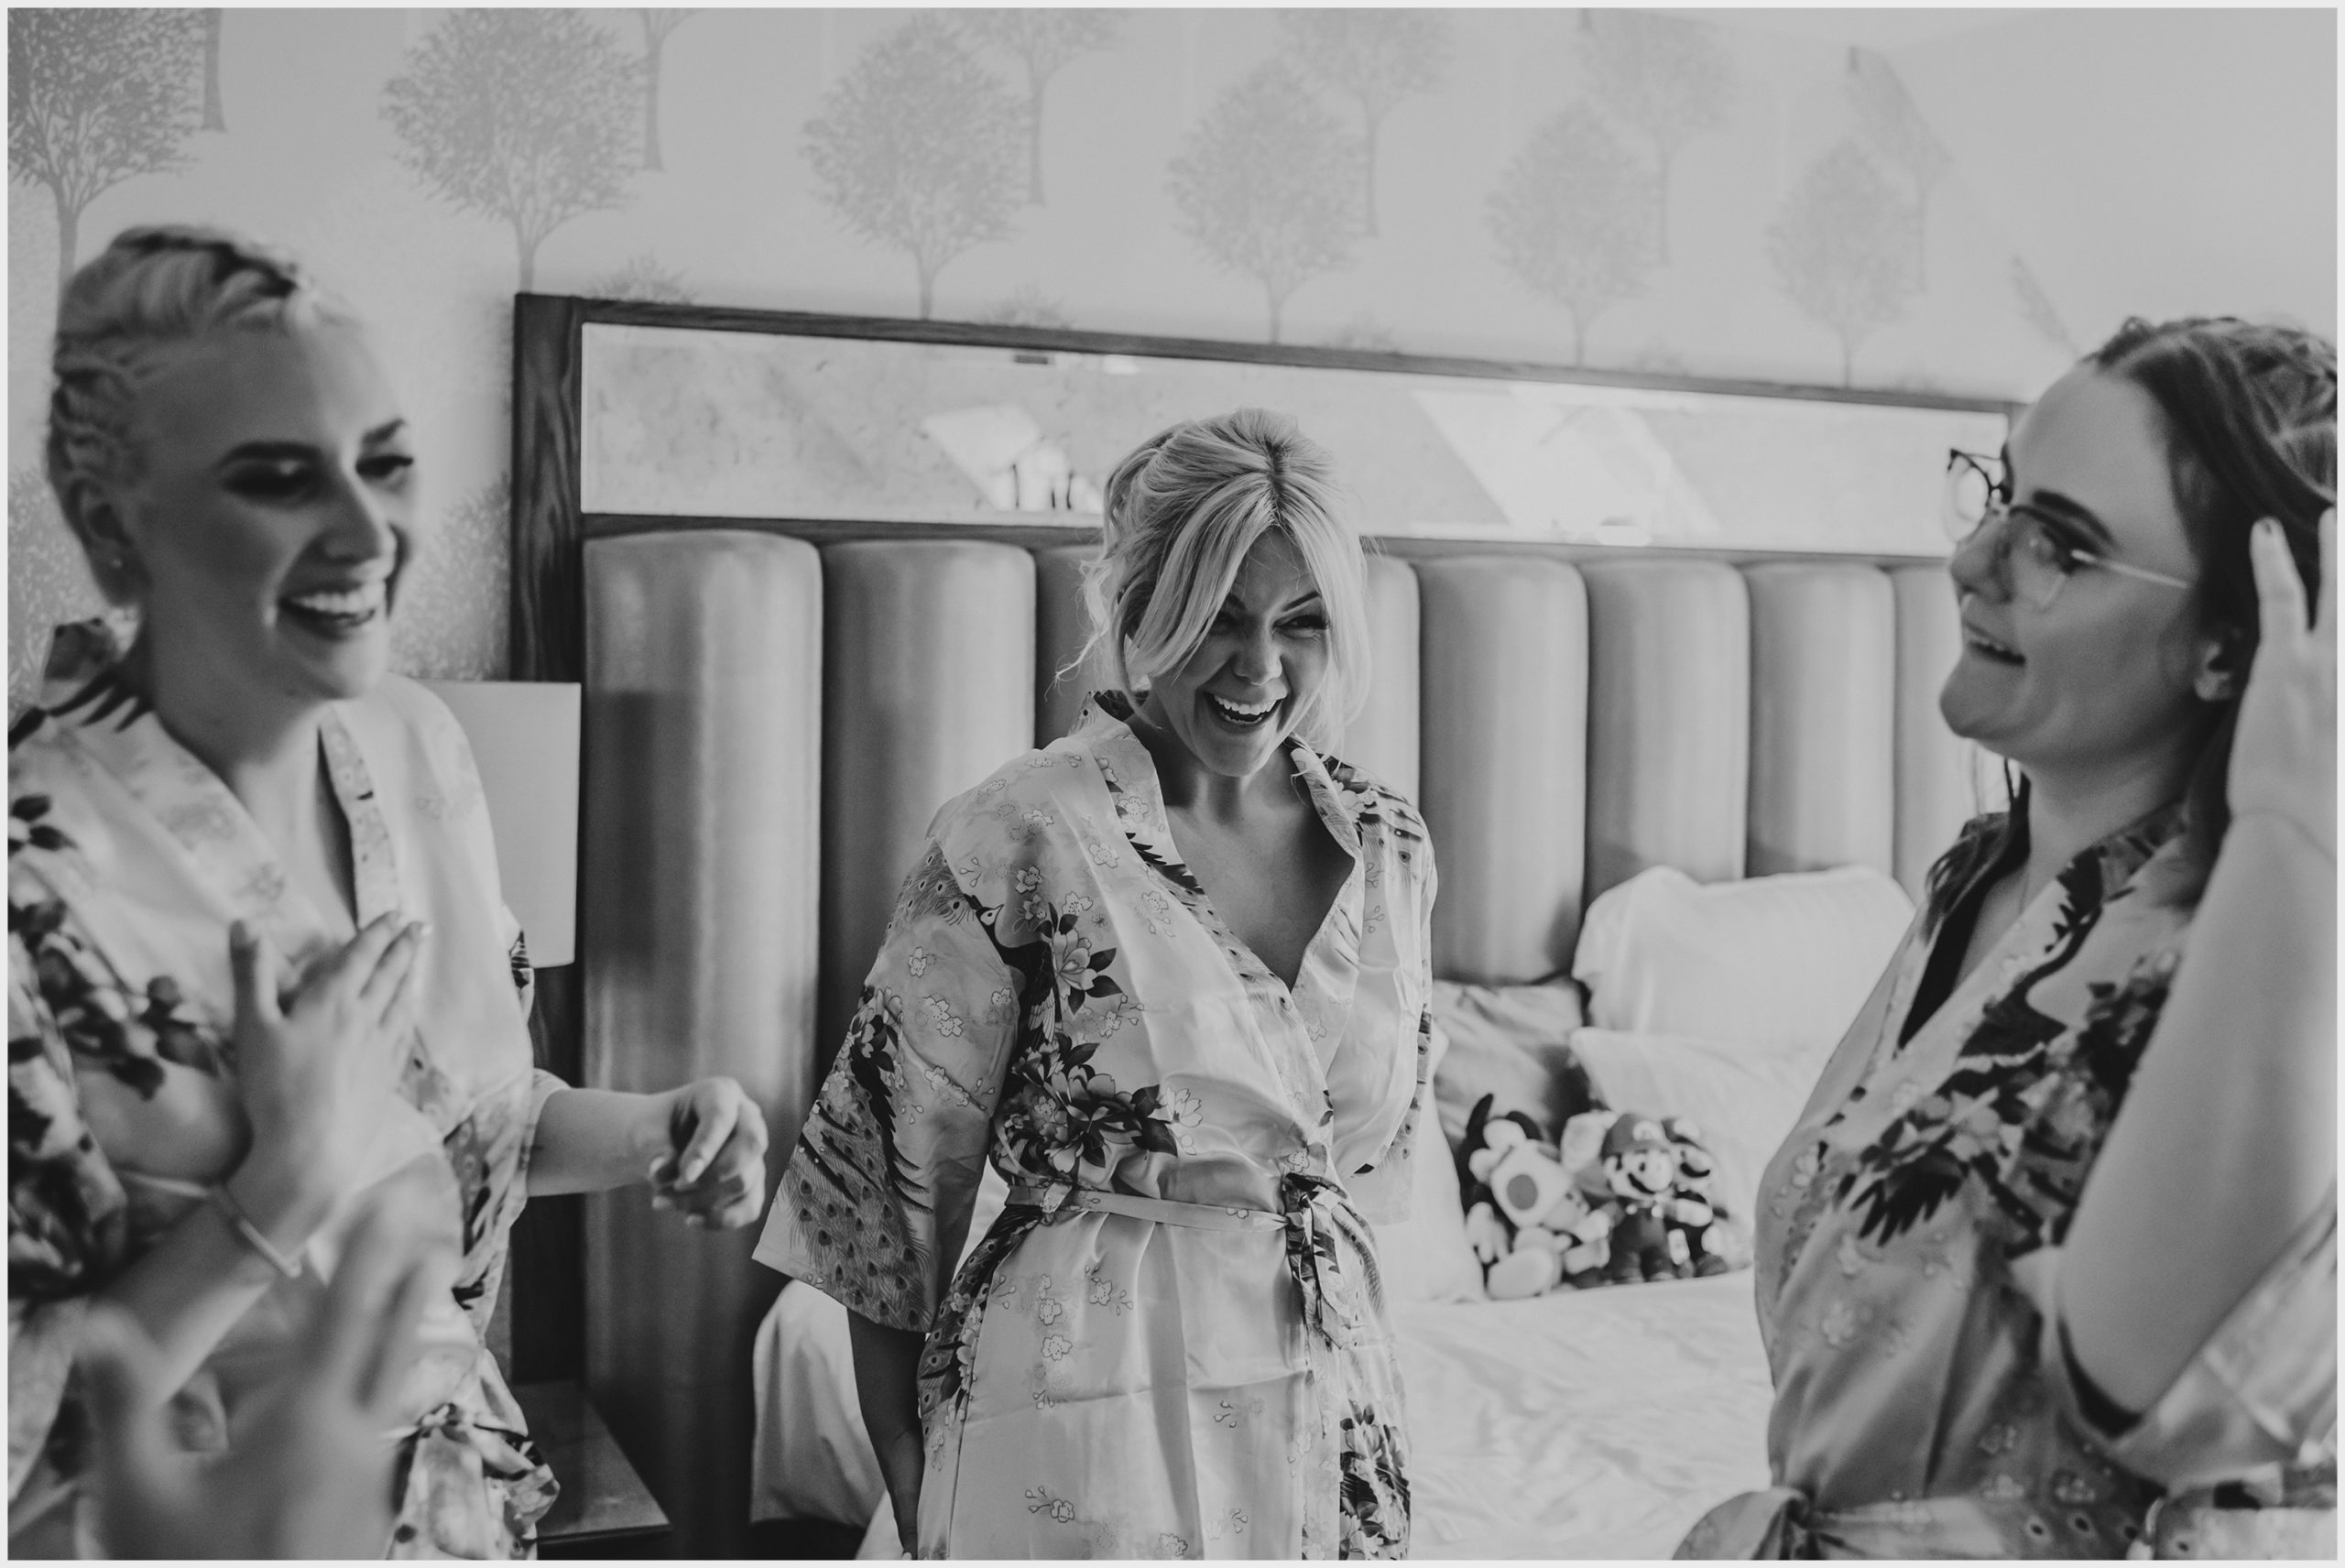 A bride and her bridesamids laughing and joking on the morning of the wedding.  Image captured by Helena Jayne Photography, a wedding photographer based in Cheshire